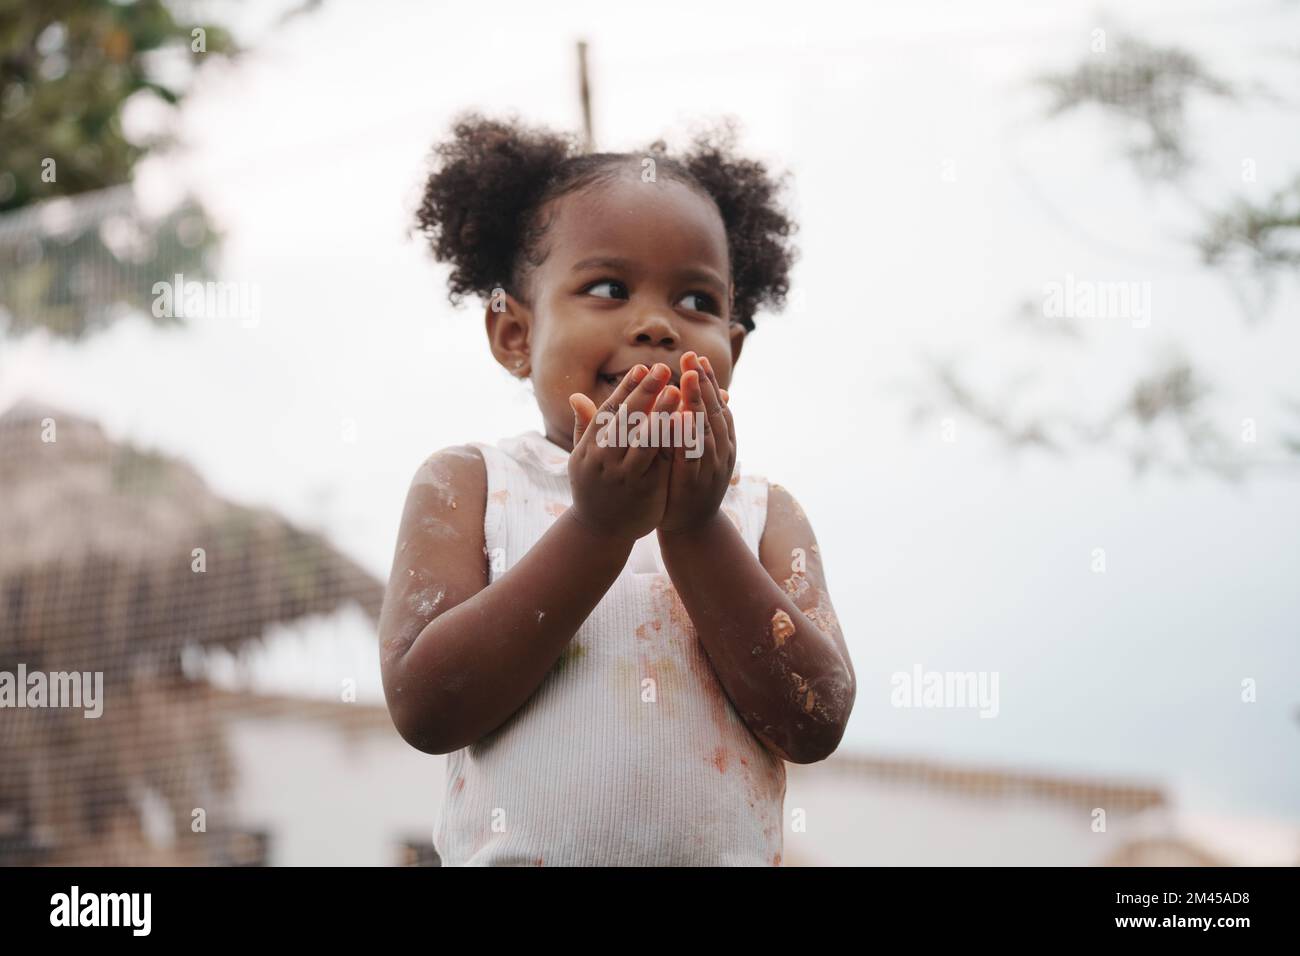 African-American child holding chicken egg with color stain on hand and dress. Stock Photo